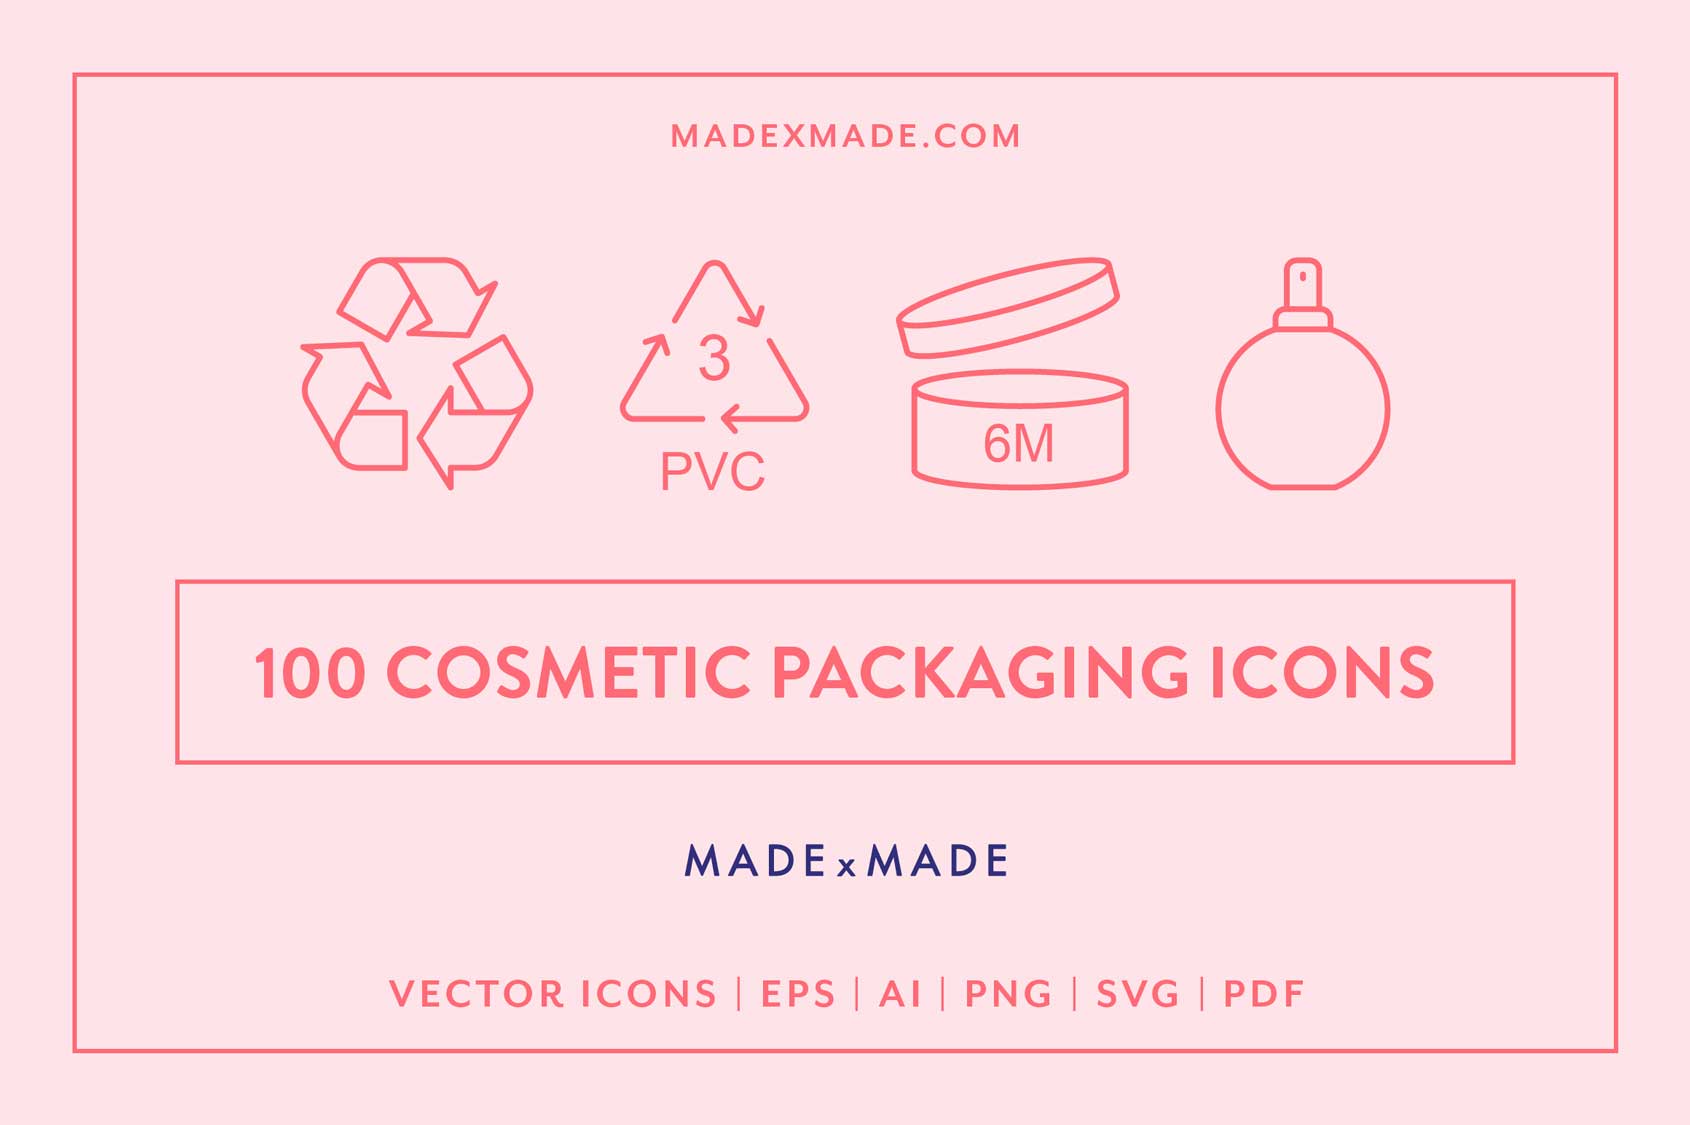 made x made icons 4x Packaging Bundle 25% Off cover – downloadable icons and symbols for packaging and labeling - cosmetic packaging